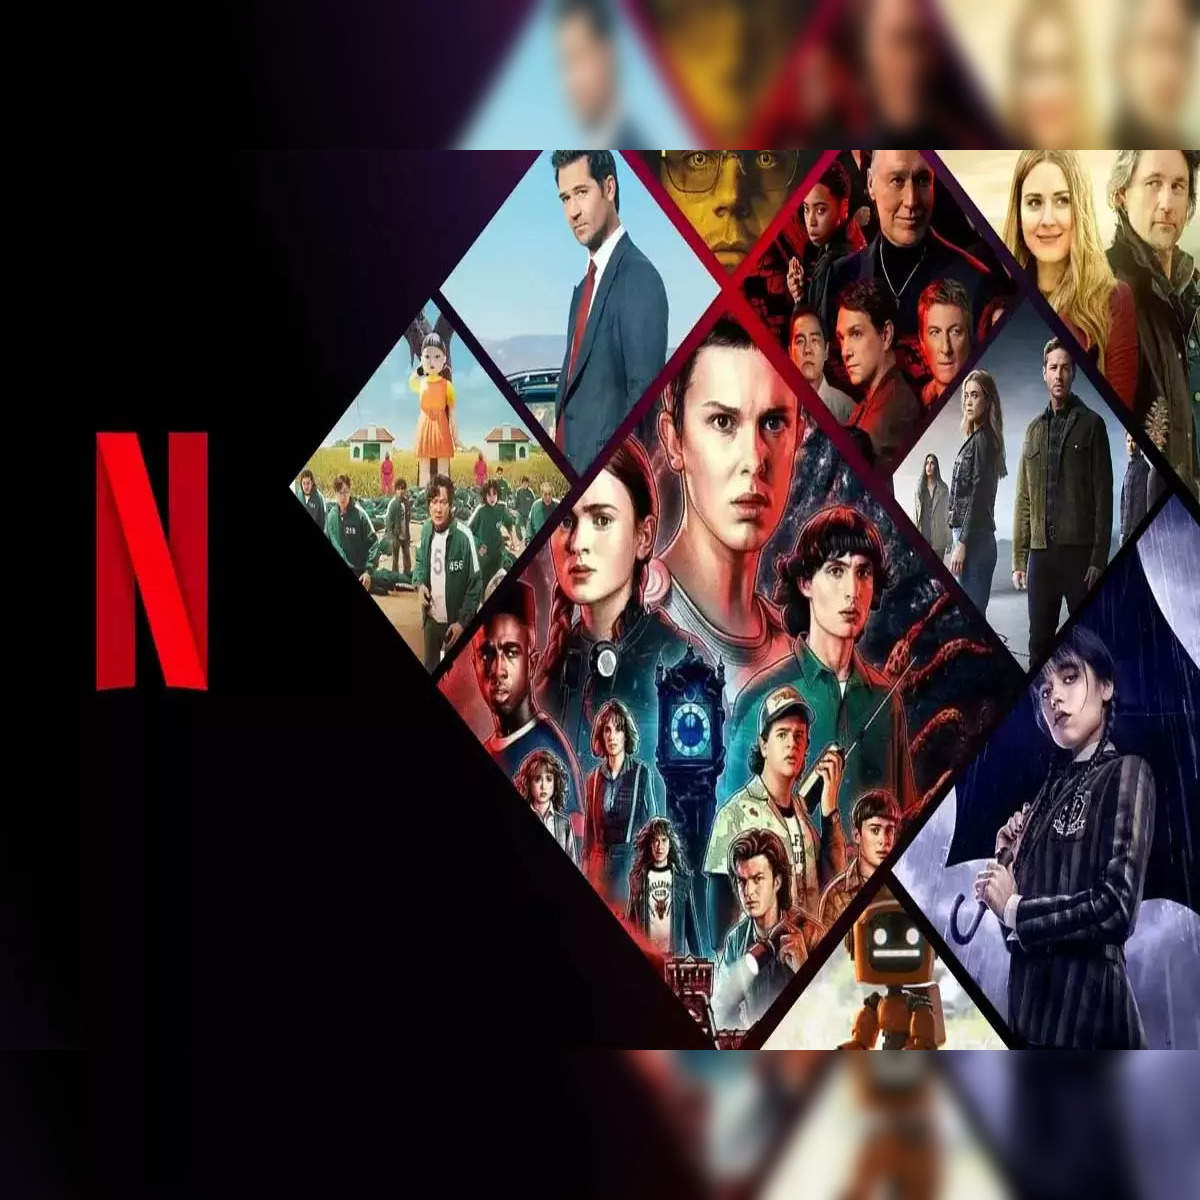 Here's What To Look Forward To On Netflix In 2023